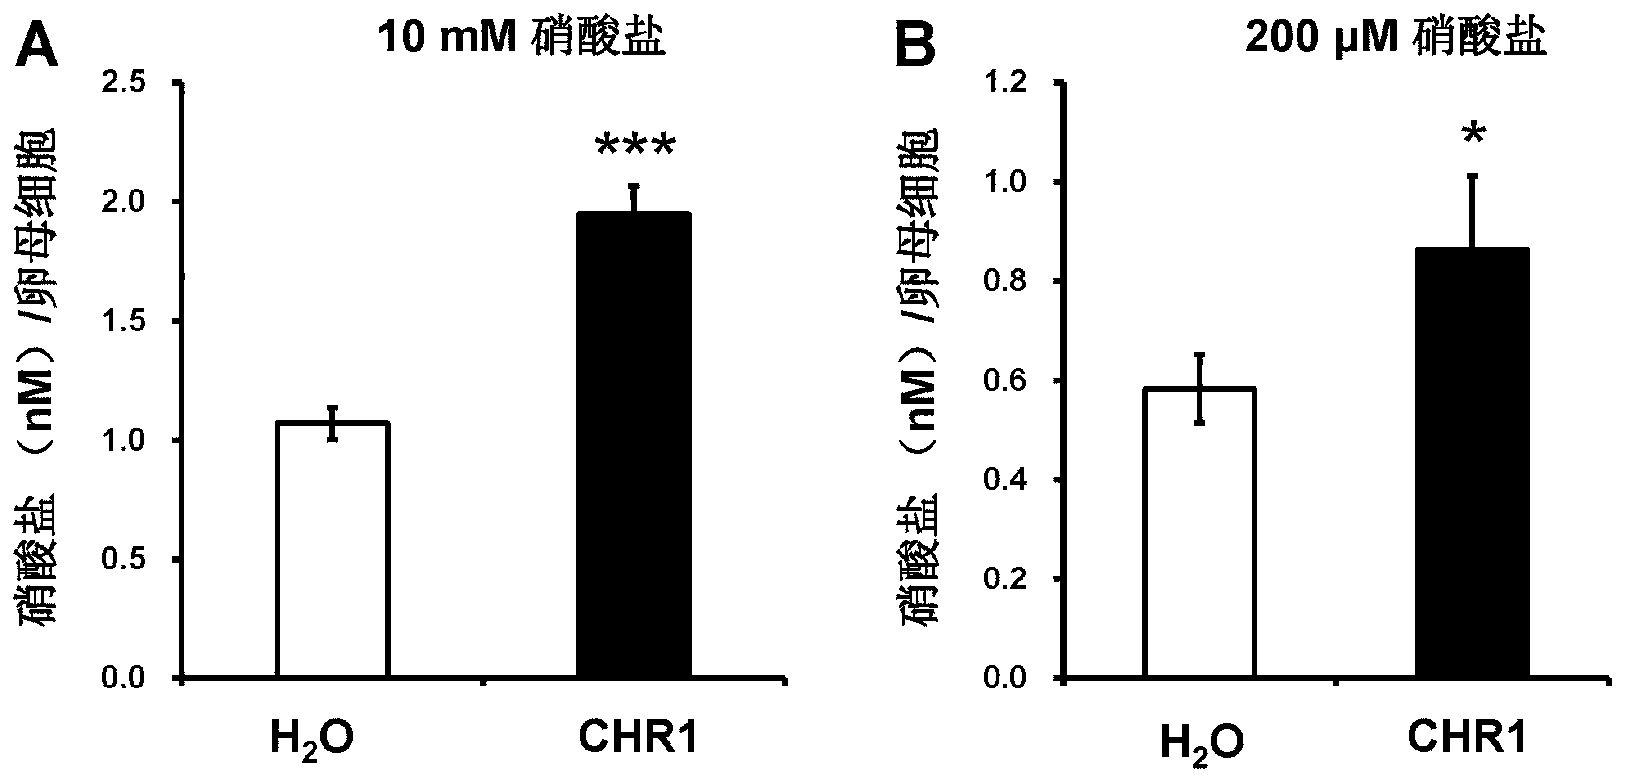 Application of rice protein CHR1 in adjusting content of plant nitrate